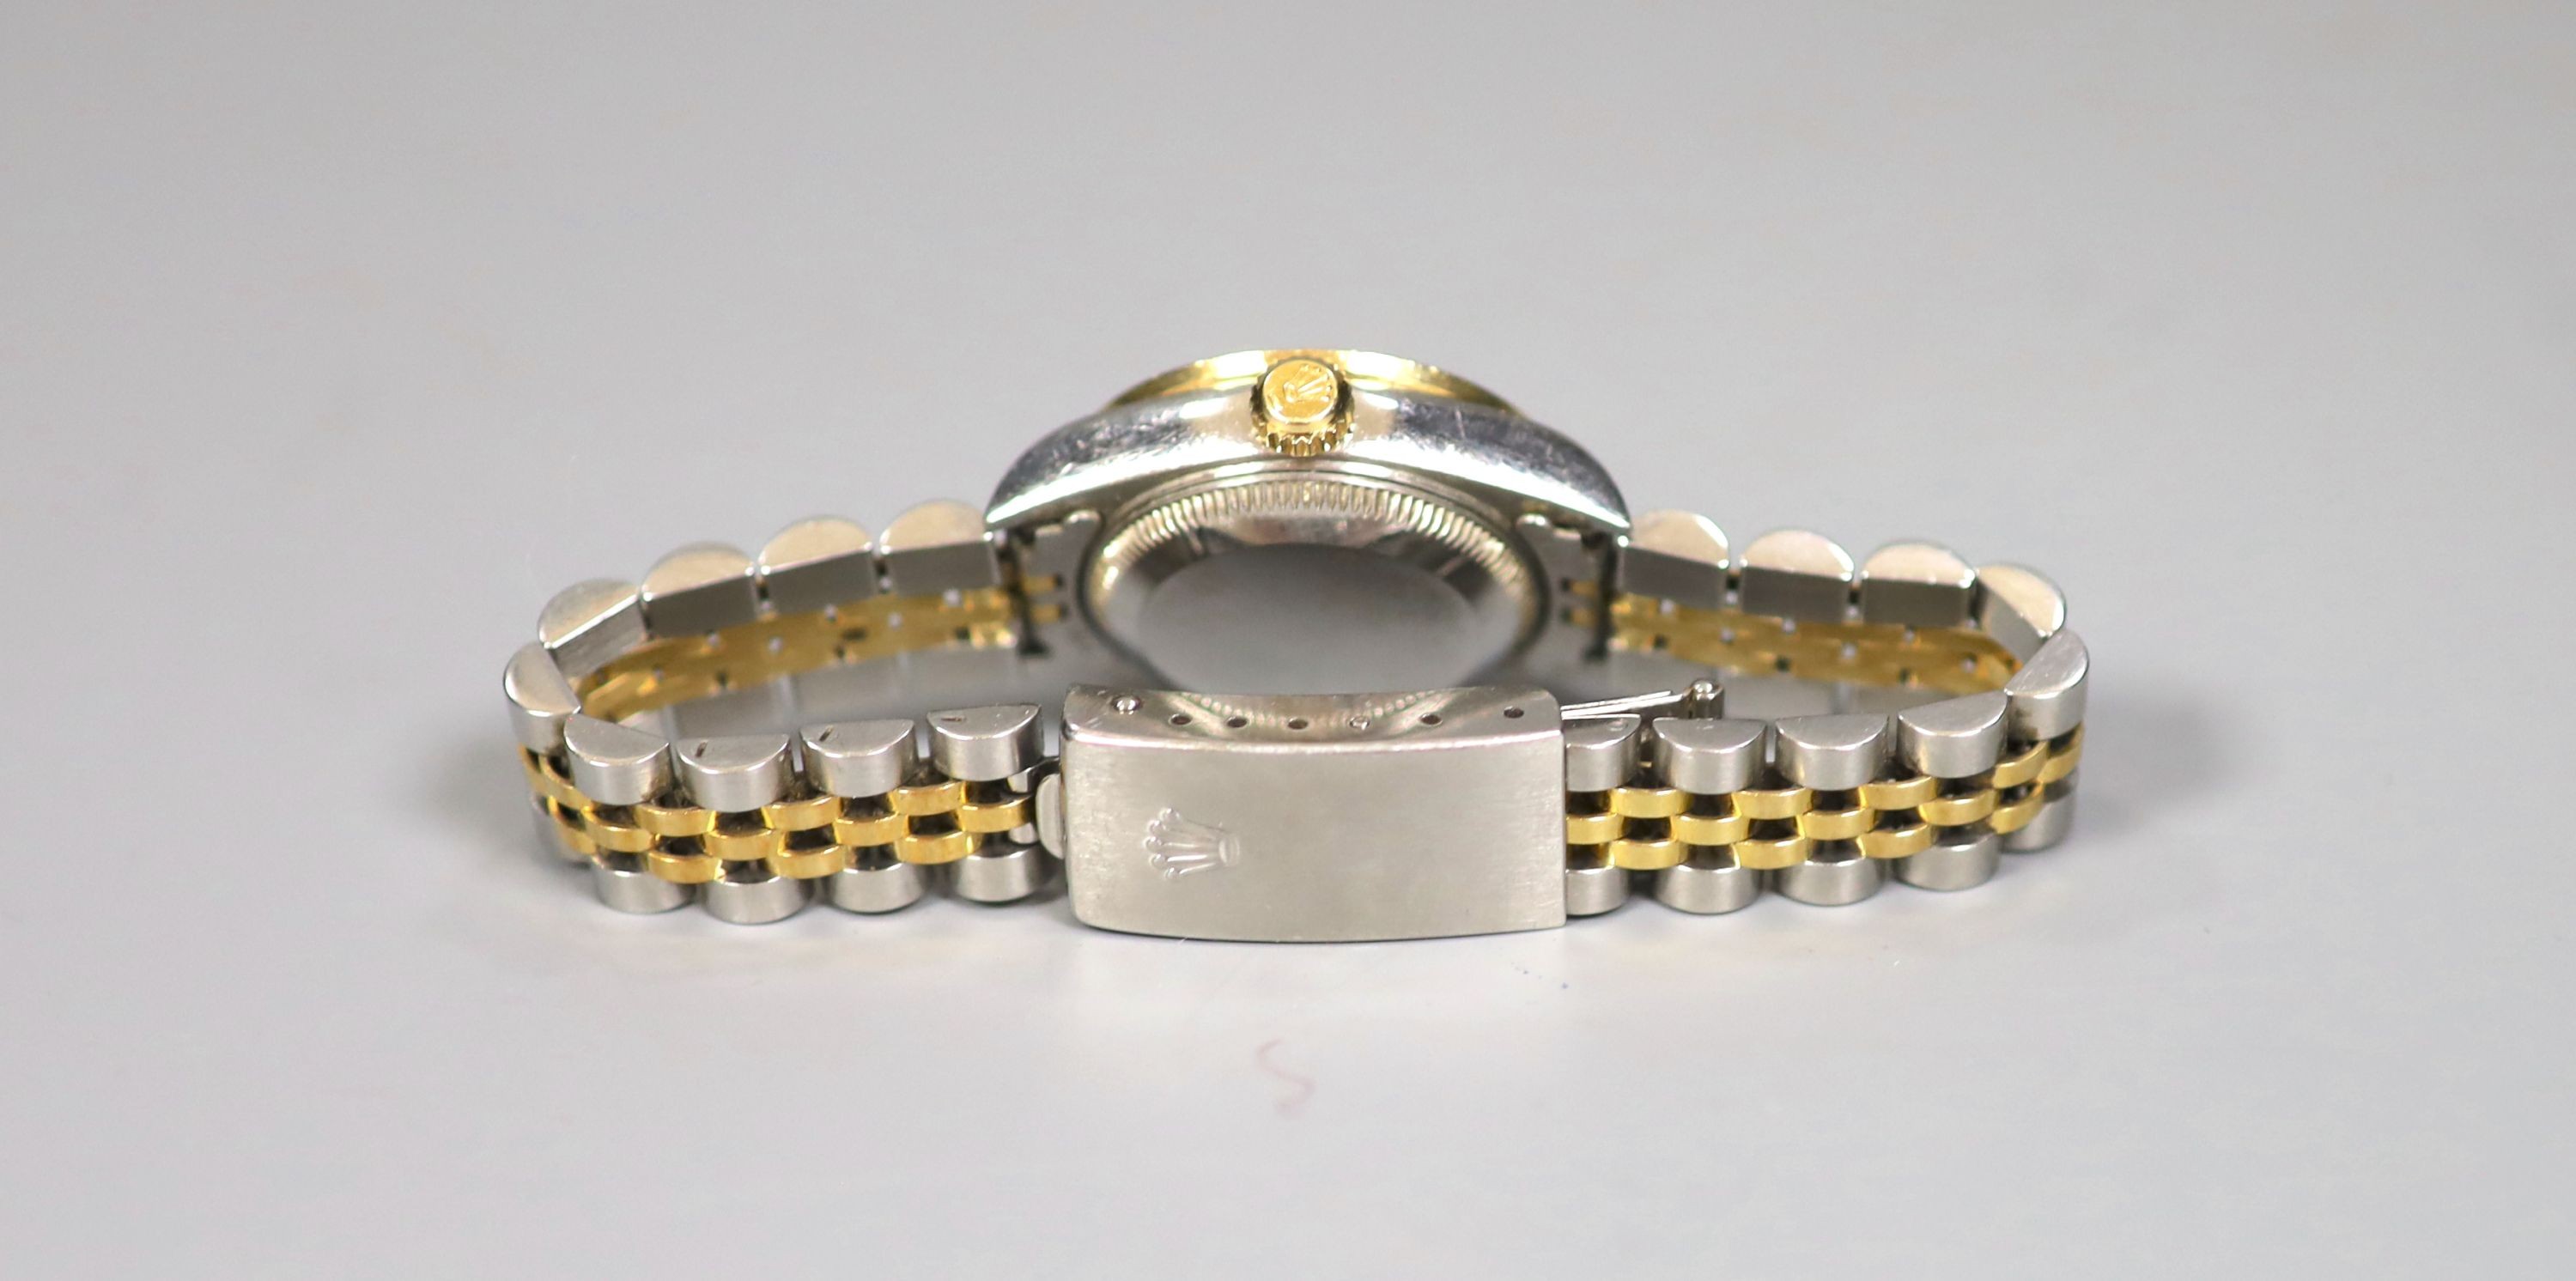 A lady's 2002 stainless steel and gold Rolex Oyster Perpetual Datejust wrist watch, with diamond set - Image 4 of 5